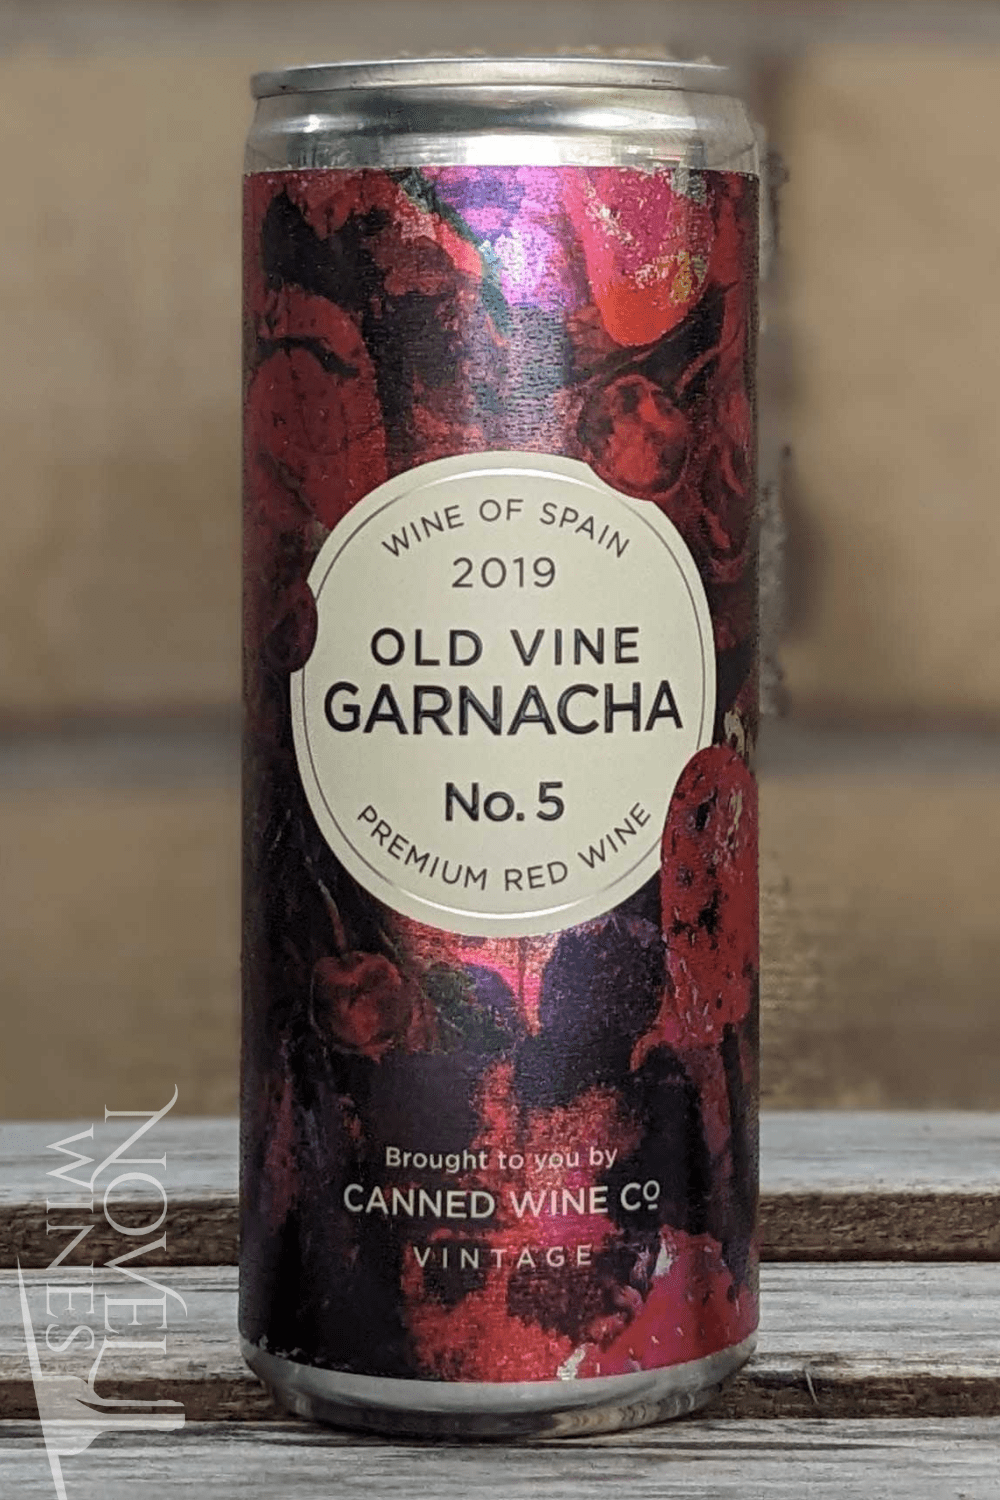 Canned Wine Co Red Wine Canned Wine Co. Vintage Old Vine Garnacha 2016, Spain